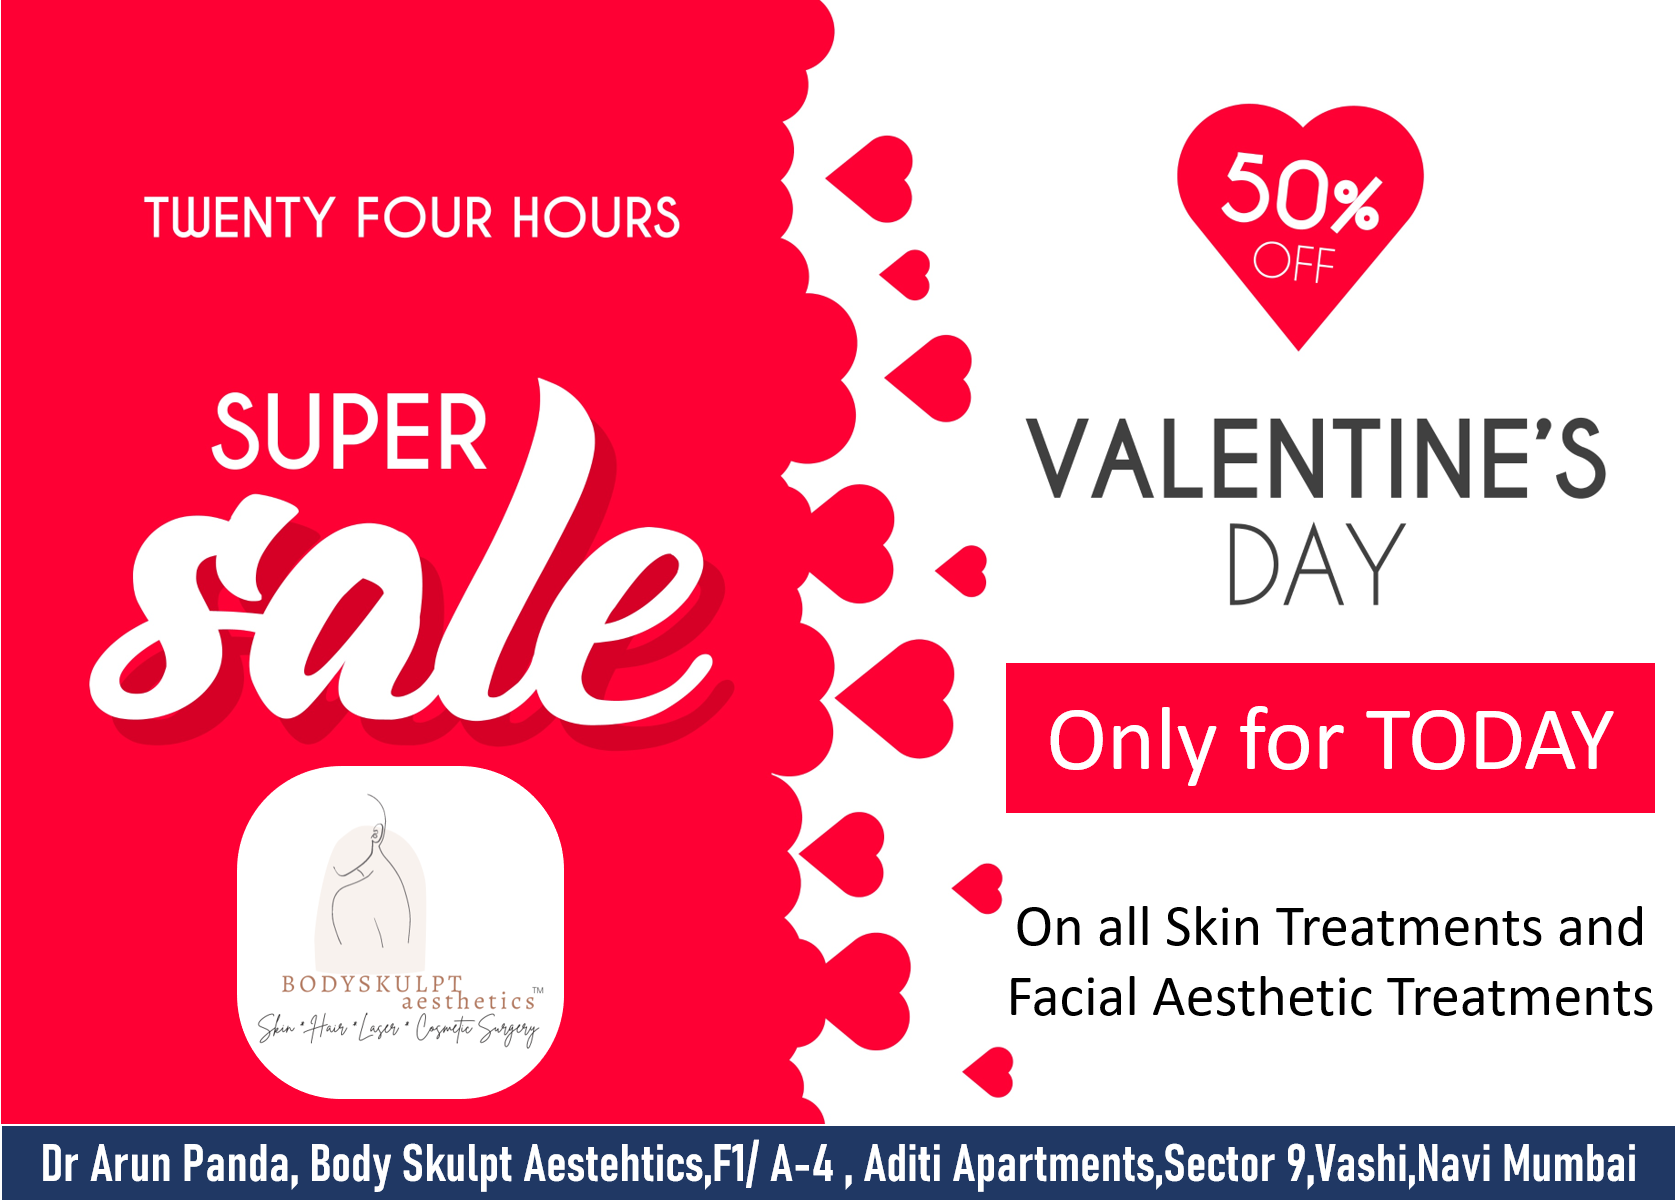 You are currently viewing Skin Treatment Offers for Valentine’s Day in Navi Mumbai